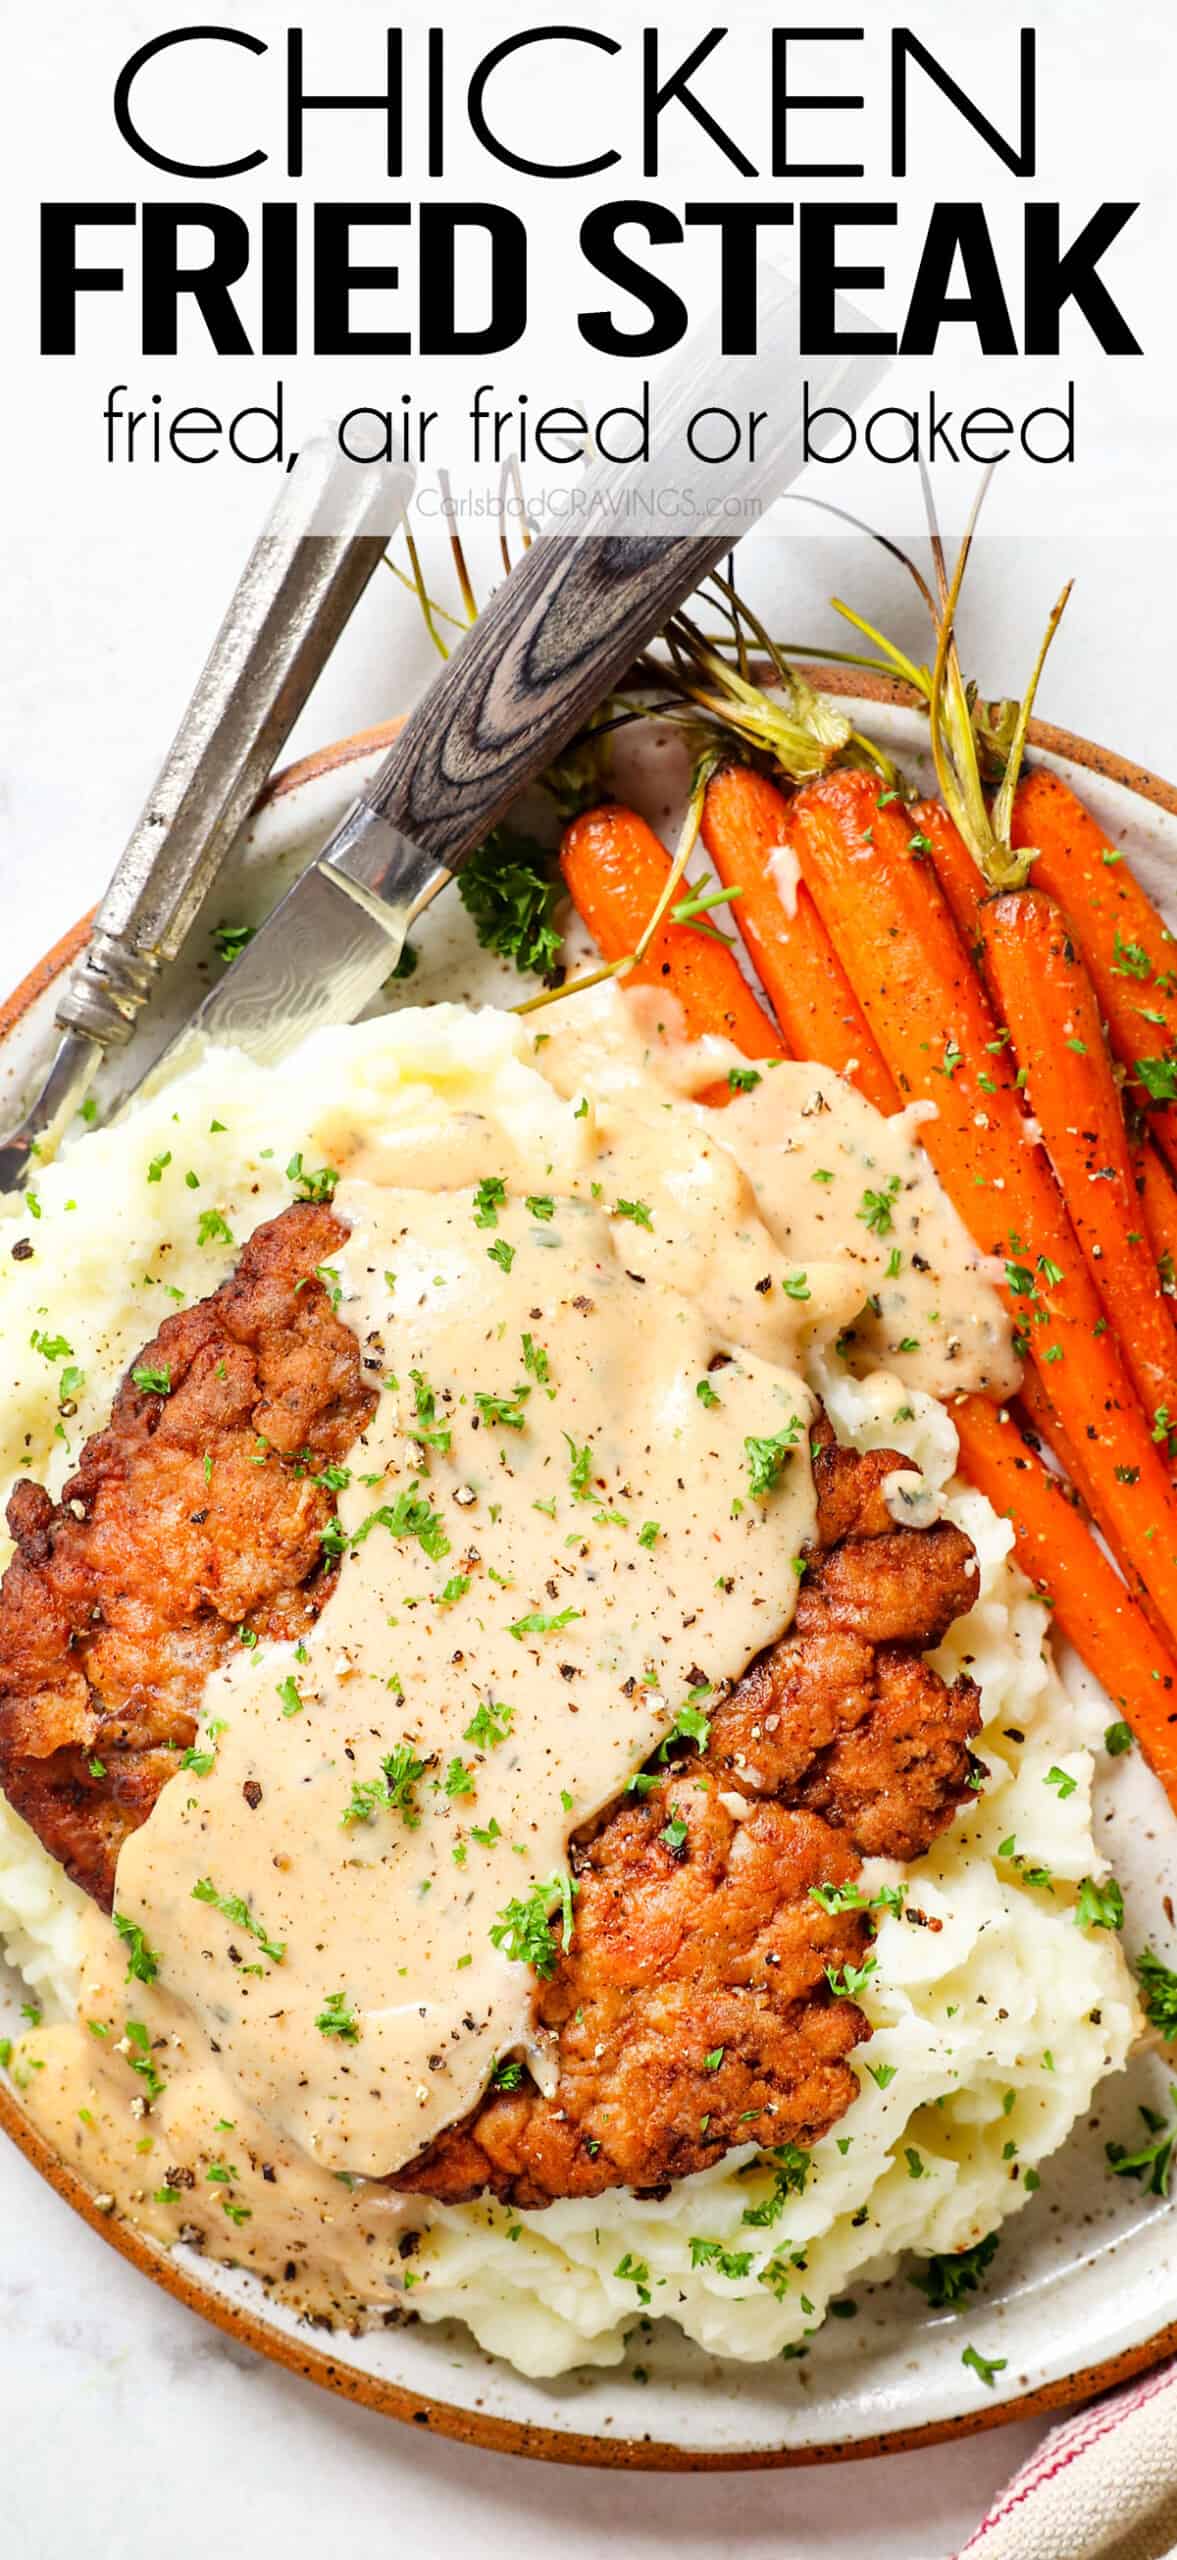 showing how to make chicken fried steak by spooning gravy over top of the steak